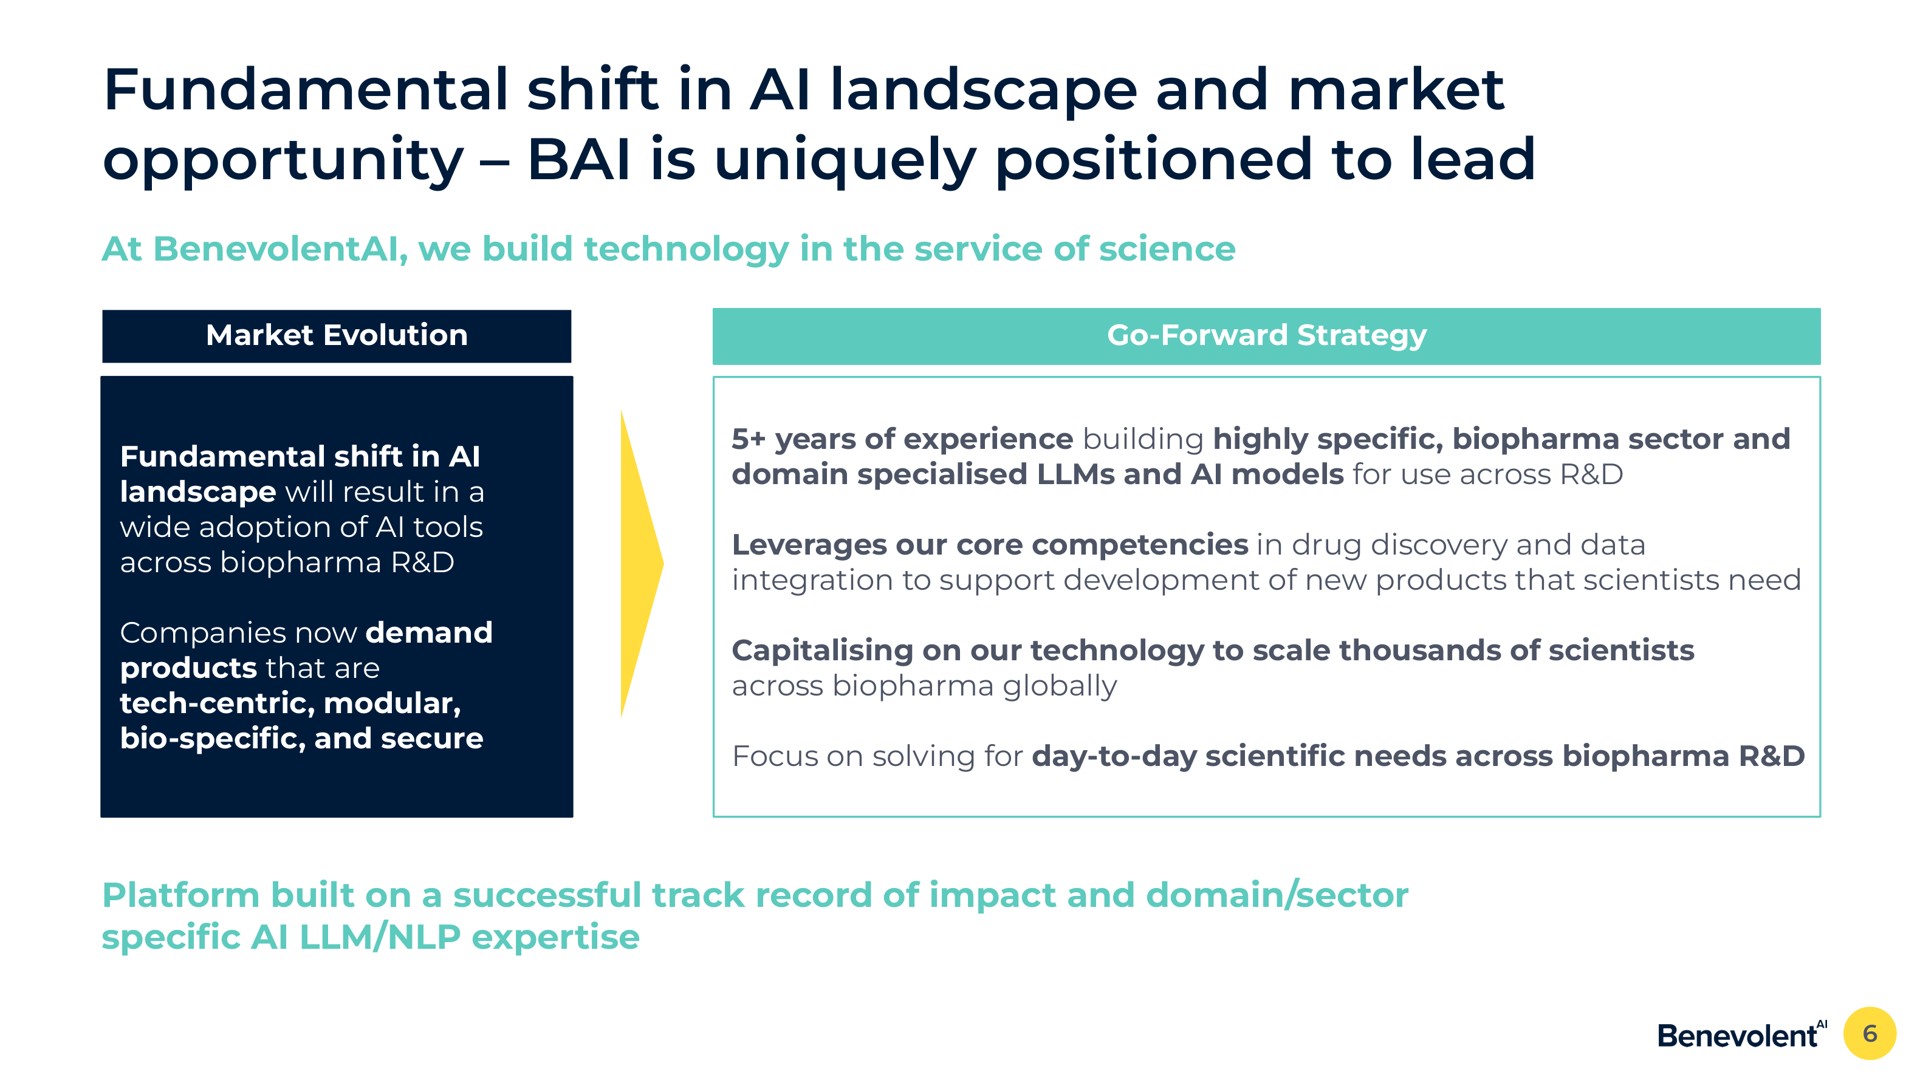 fundamental shift in landscape and market opportunity is uniquely positioned to lead | BenevolentAI